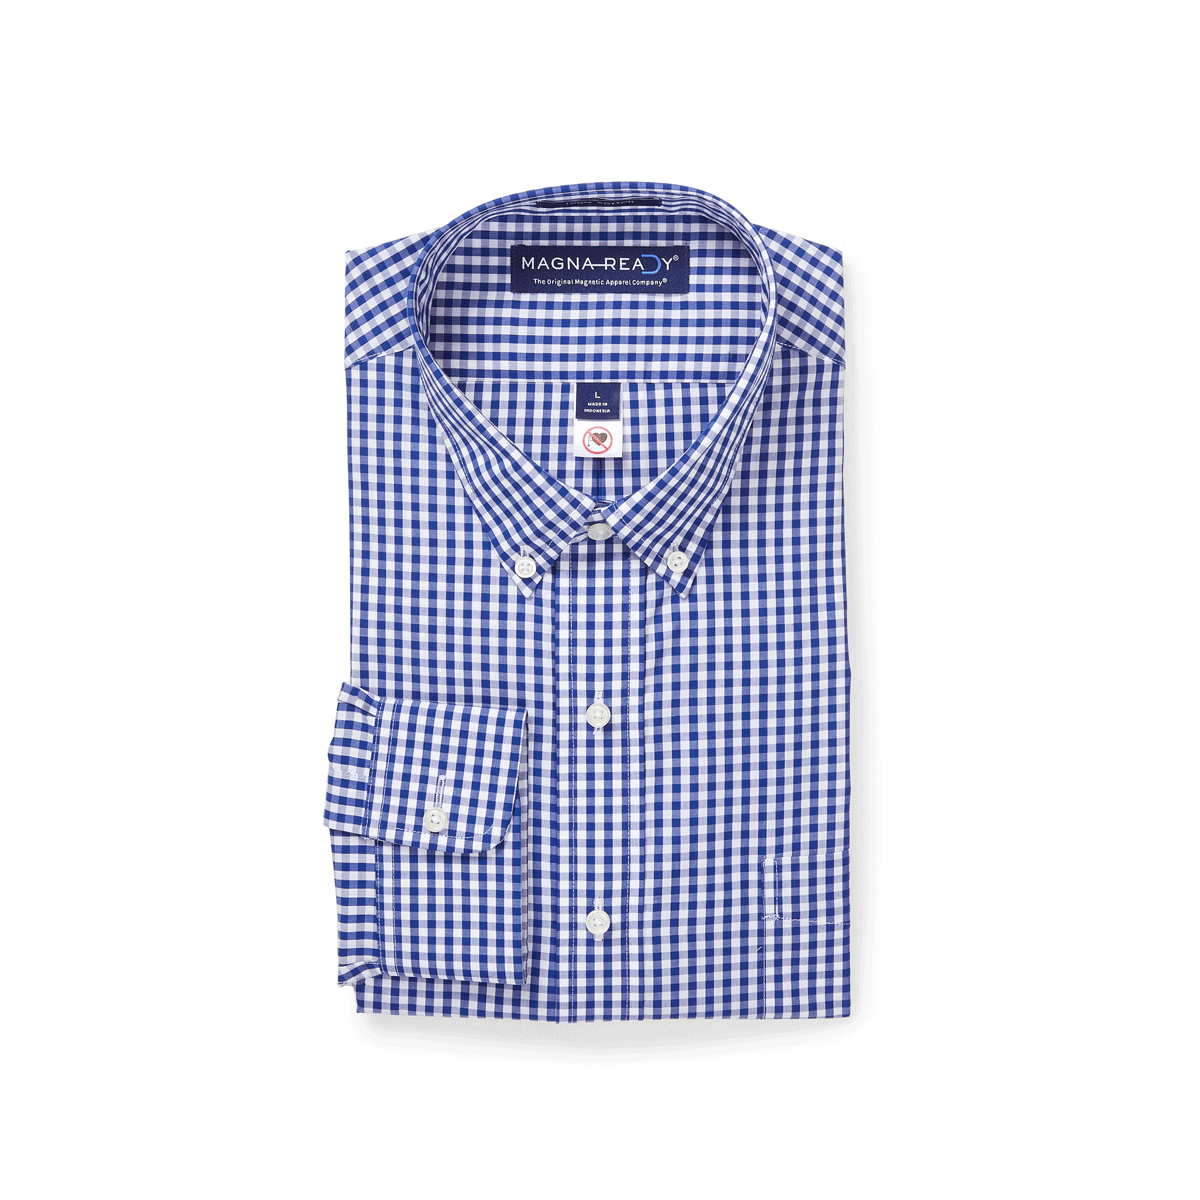 Everyday Magnetic Button-Down Shirt for Men : Navy Check Large